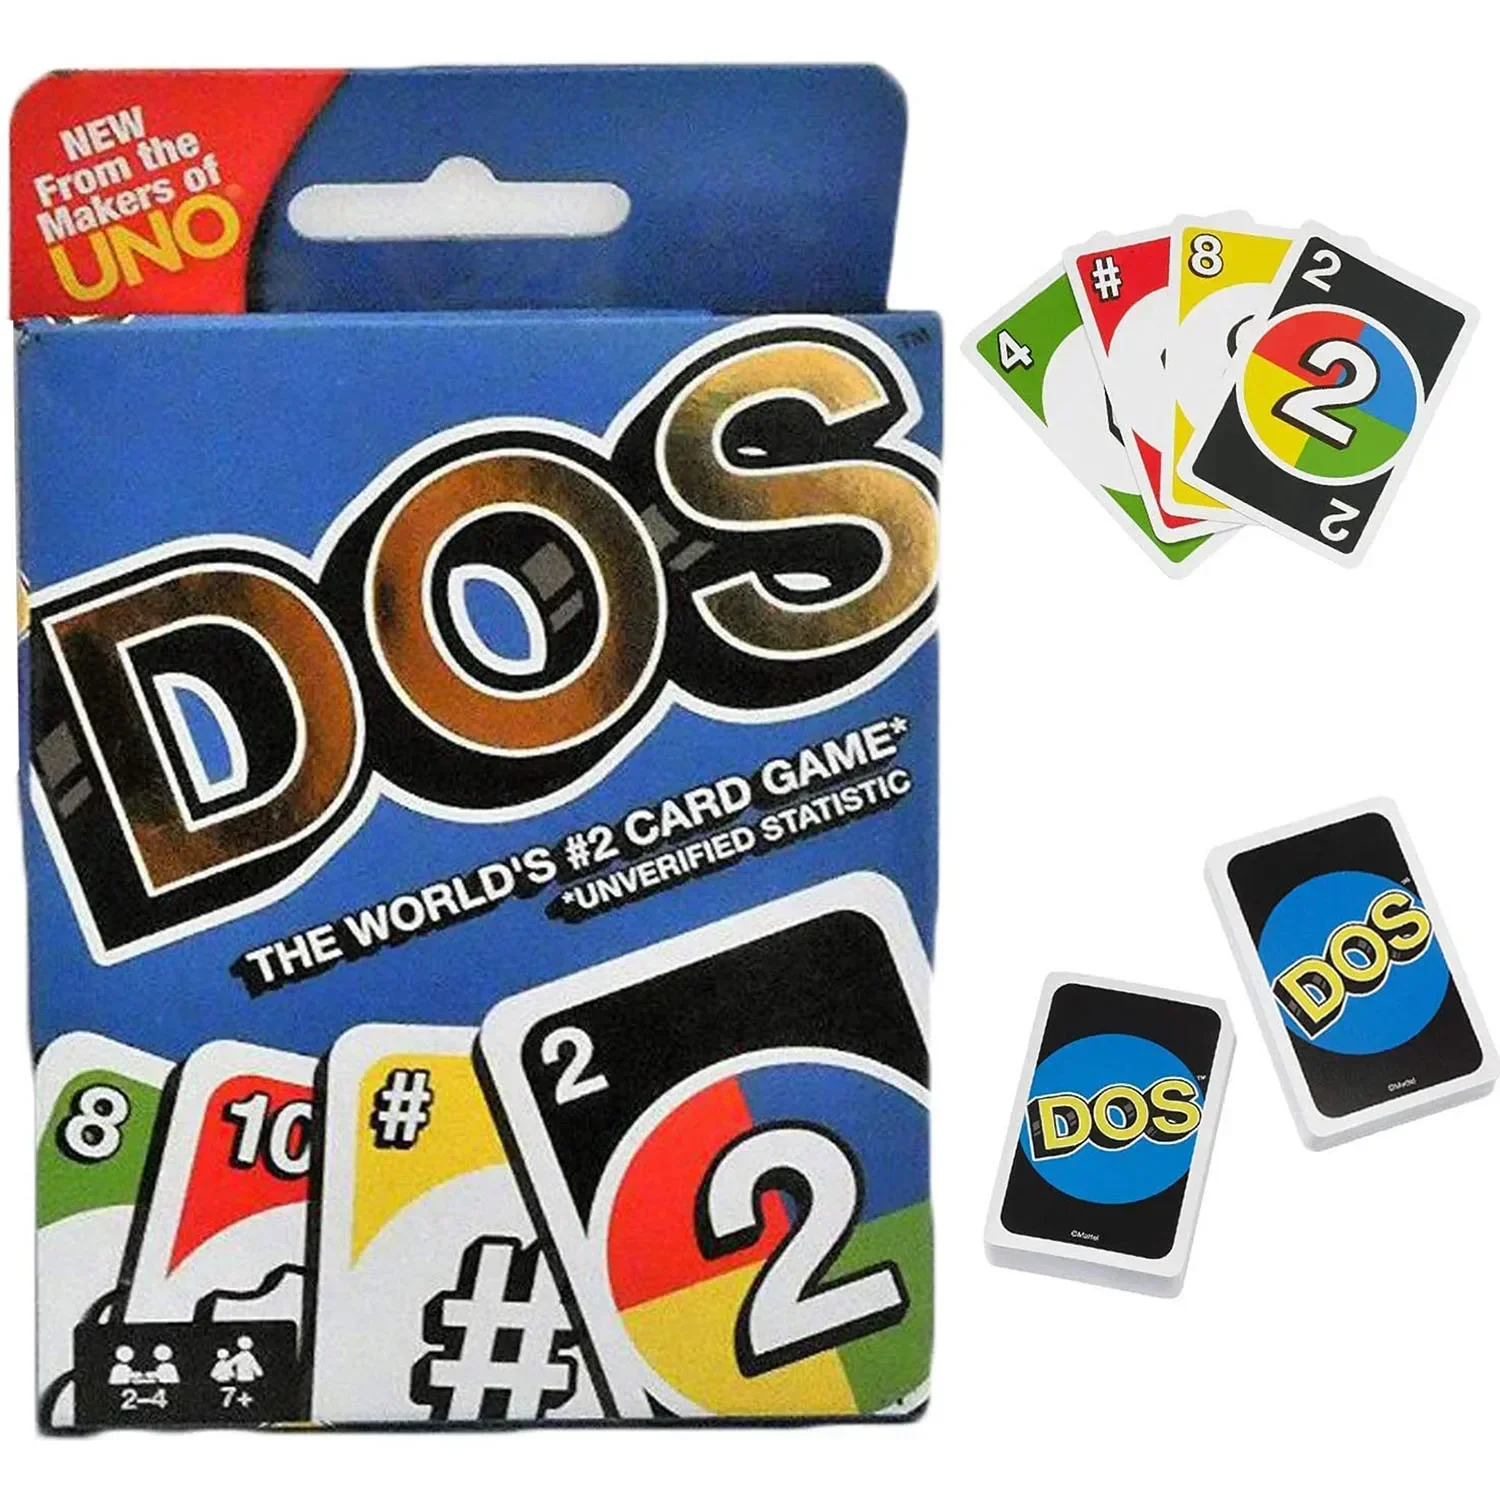 Uno dos card game family party board game toys fun the world s 2 card game thumb200